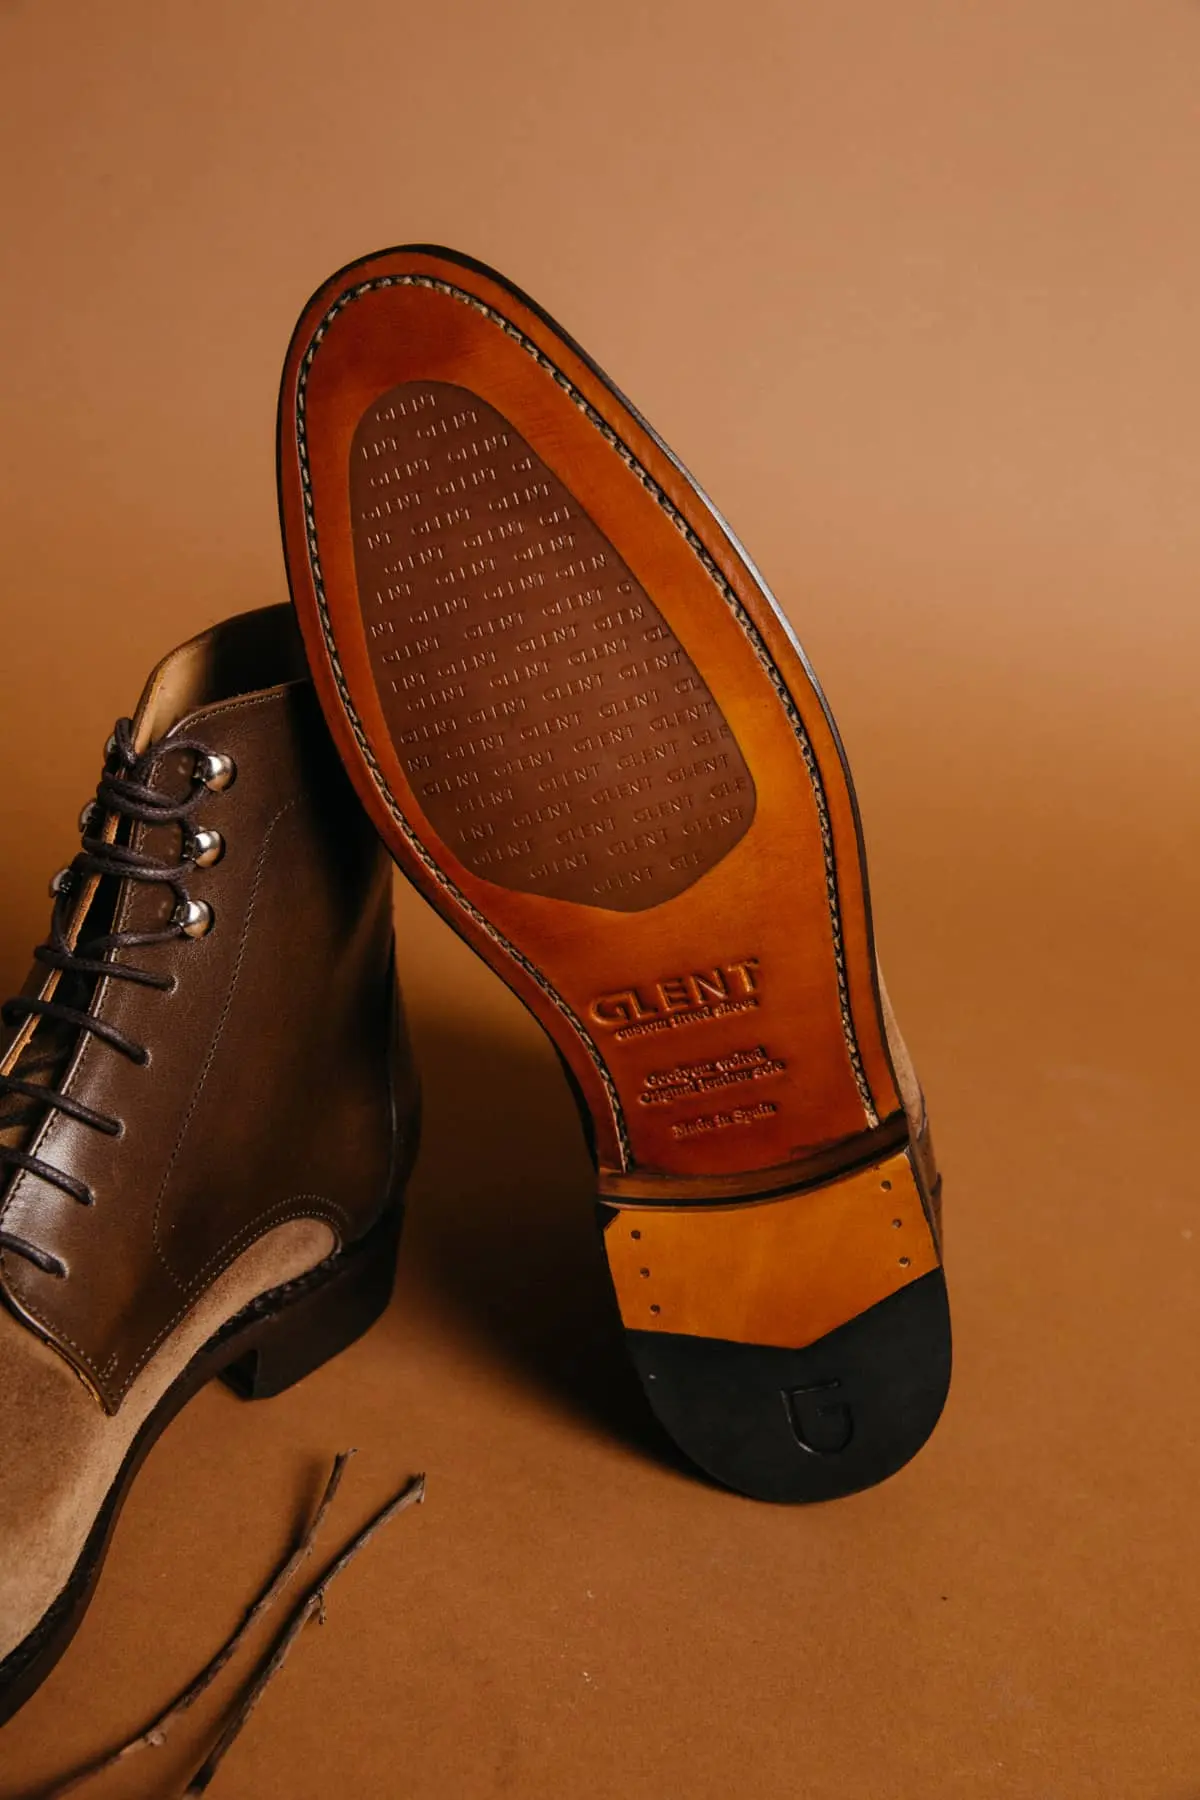 A master stroke in shoemaking according to podiatrists